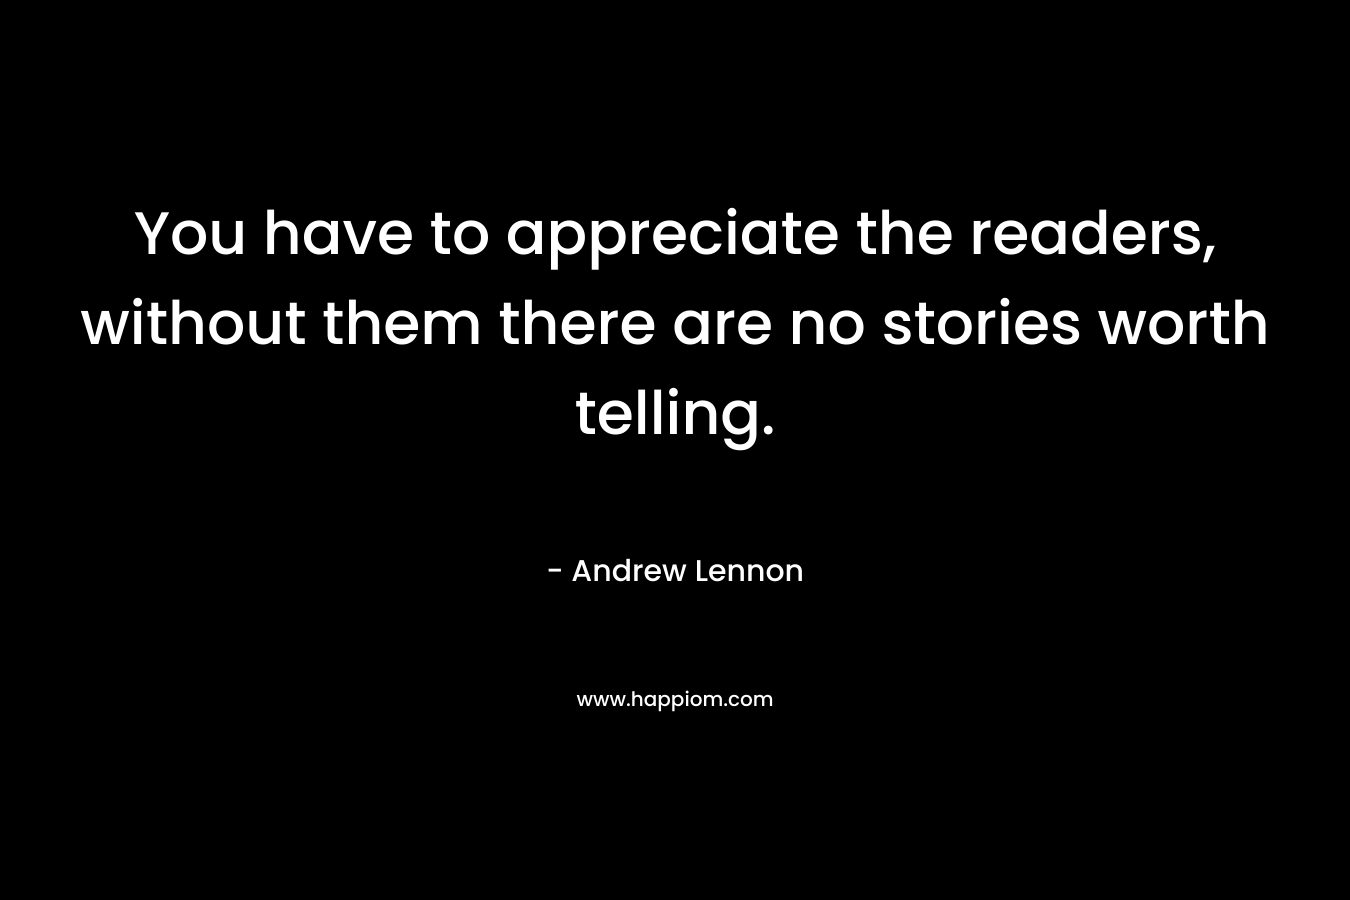 You have to appreciate the readers, without them there are no stories worth telling.